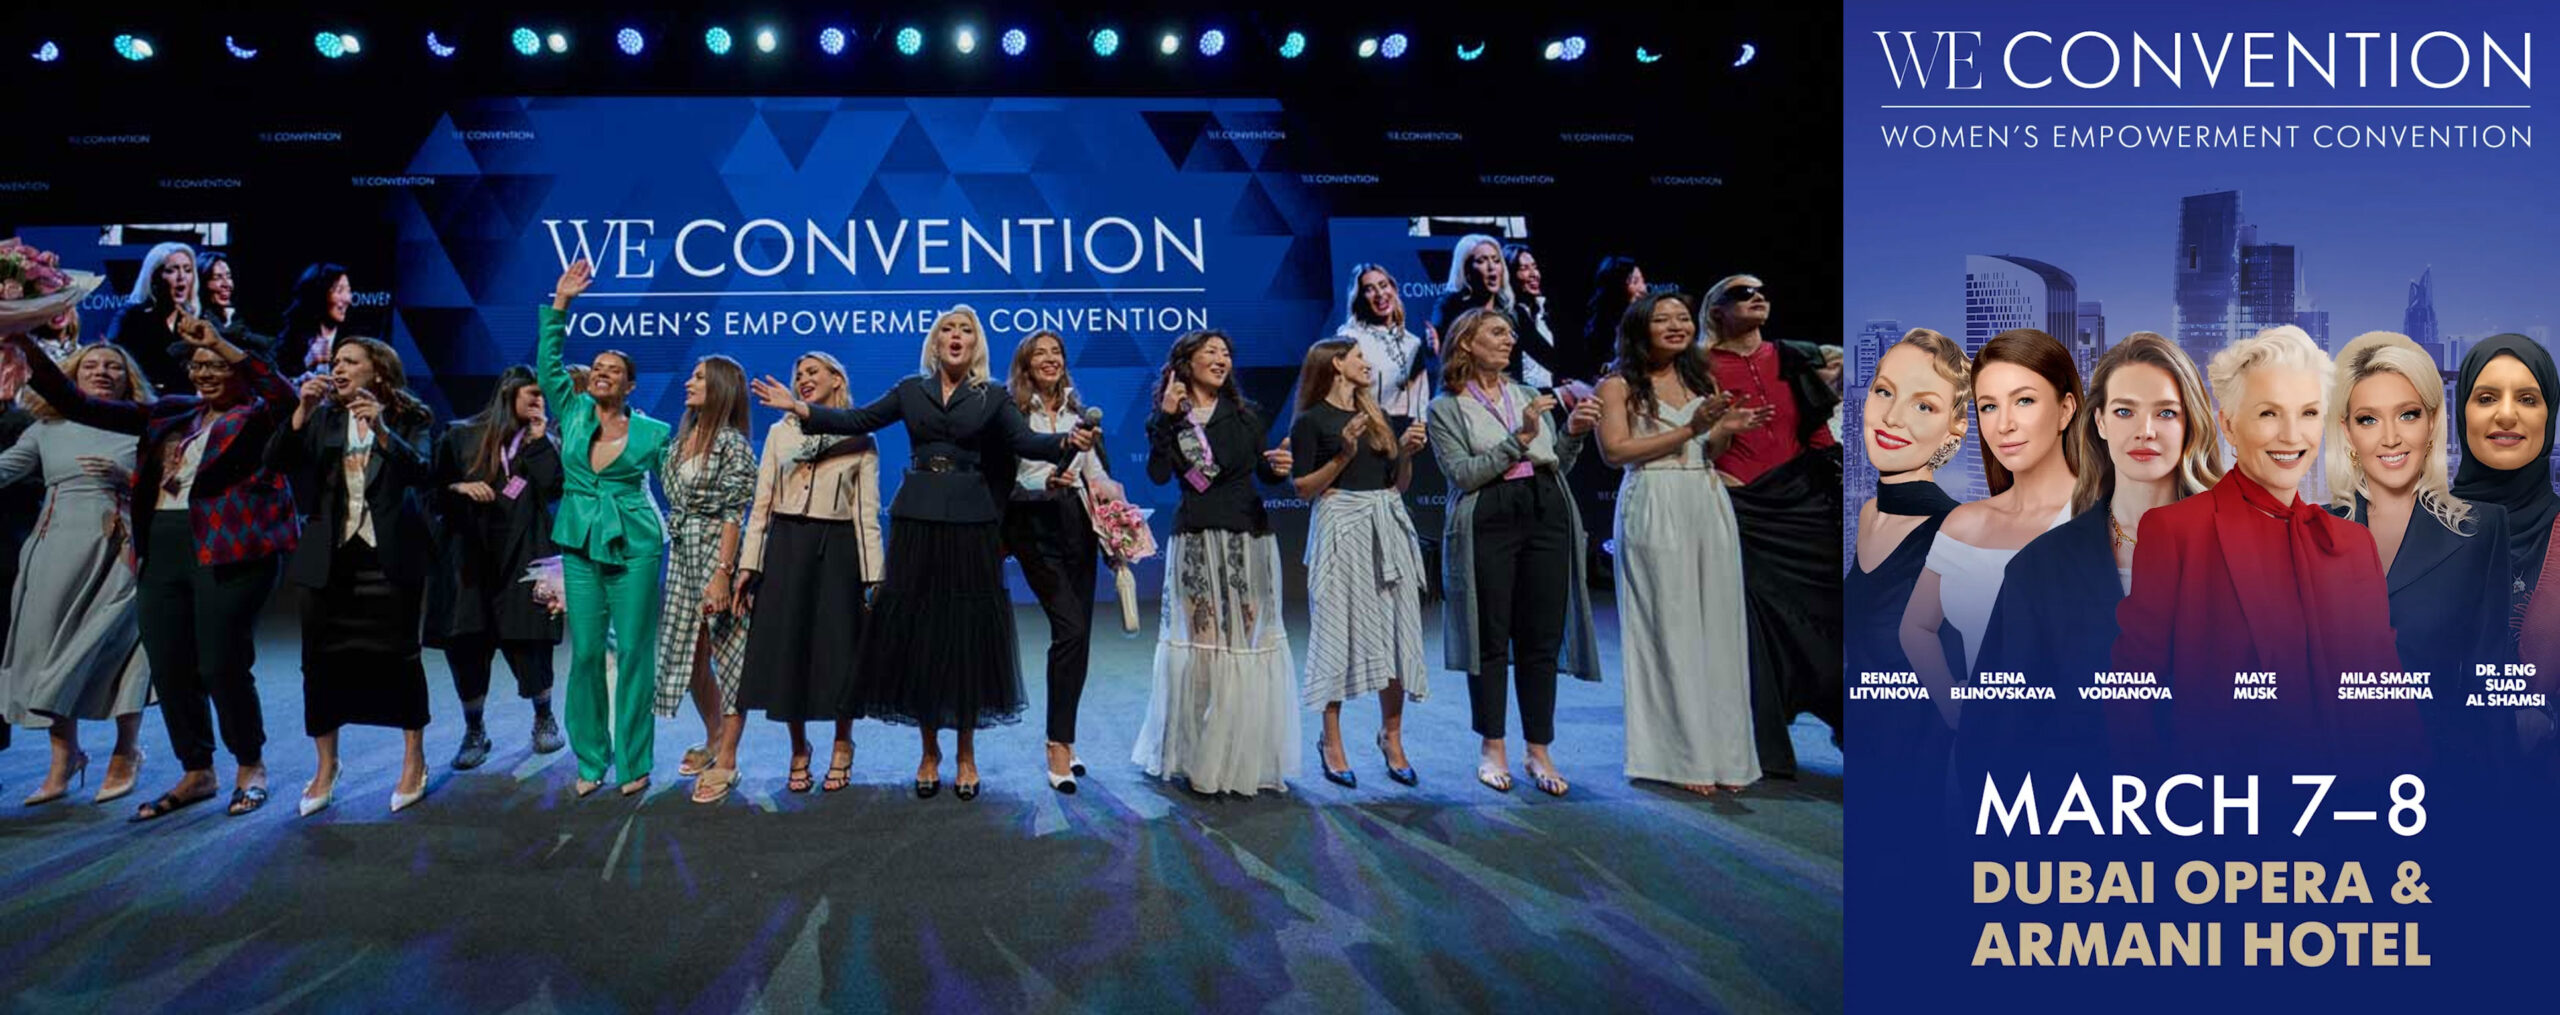 WE Convention: An Event for Women's Empowerment